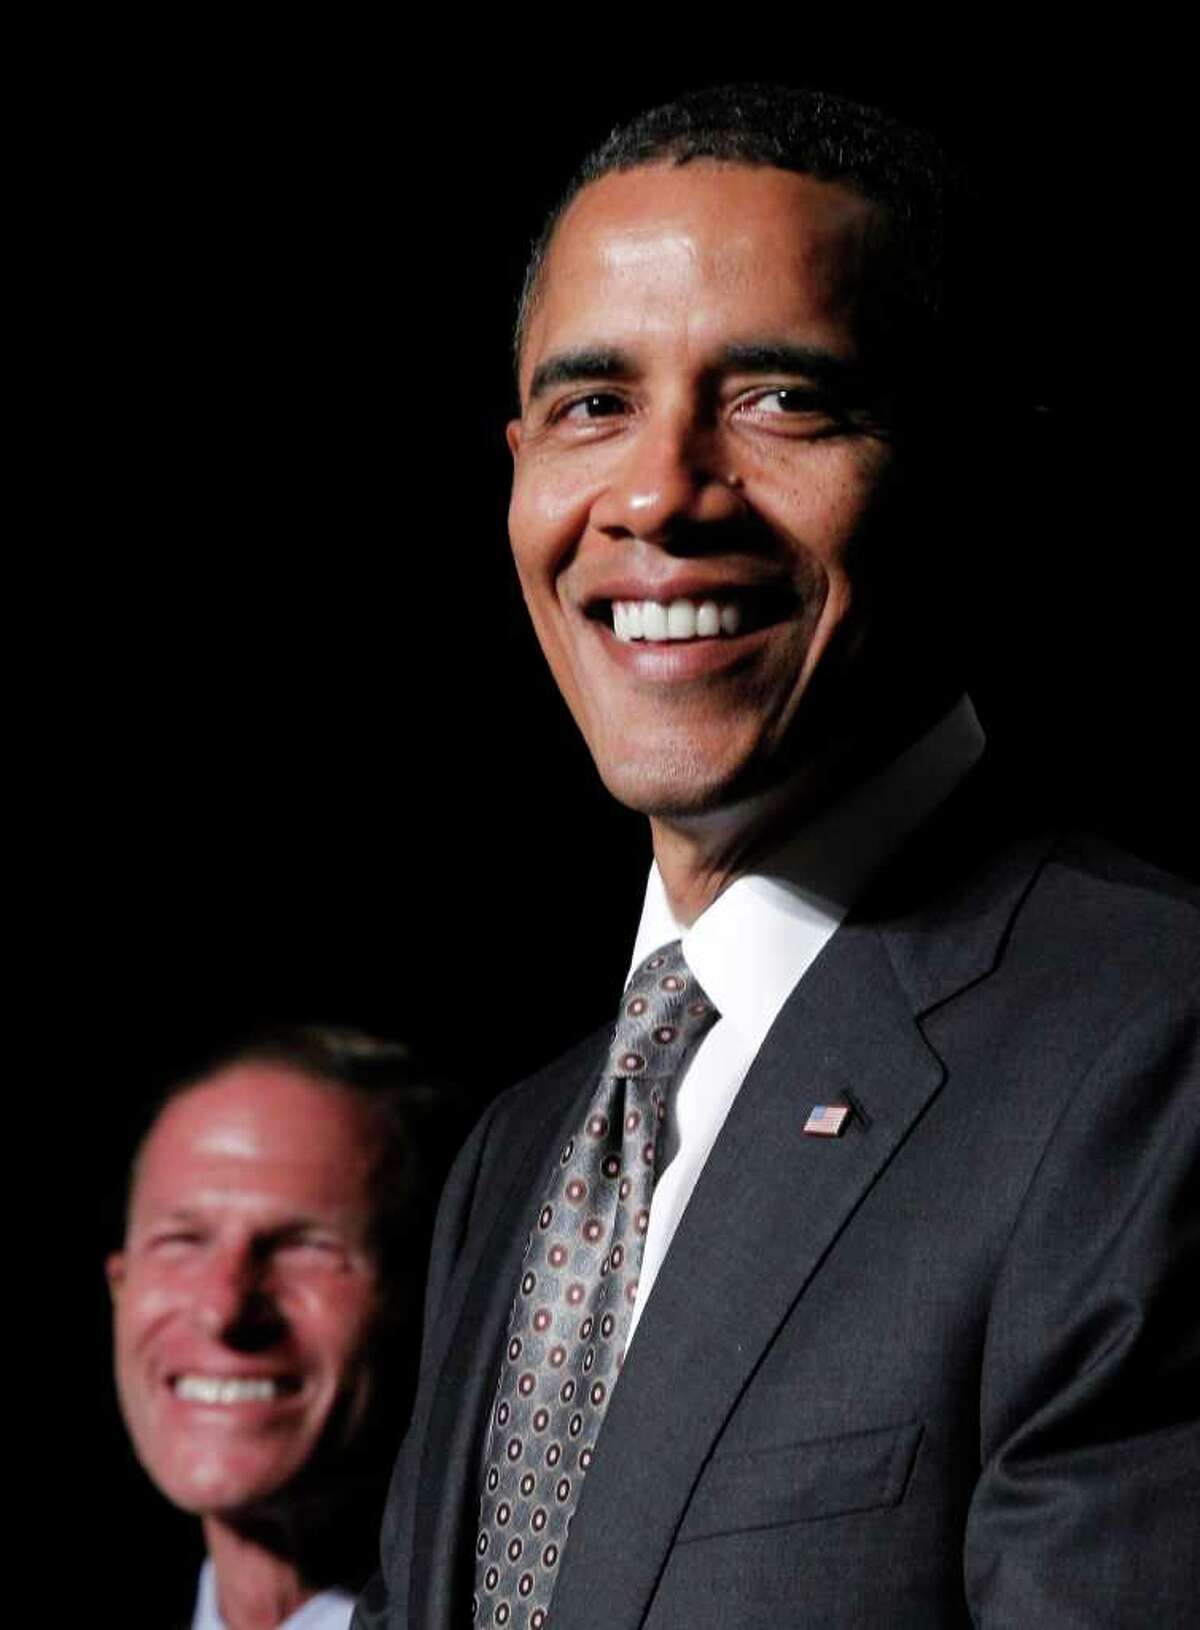 President Barack Obama, right, with Connecticut Attorney General and Democrat candidate for US Senate Richard Blumenthal, left, during a fundraiser in Stamford Sept. 16, 2010. AP Photo/Pablo Martinez Monsivais